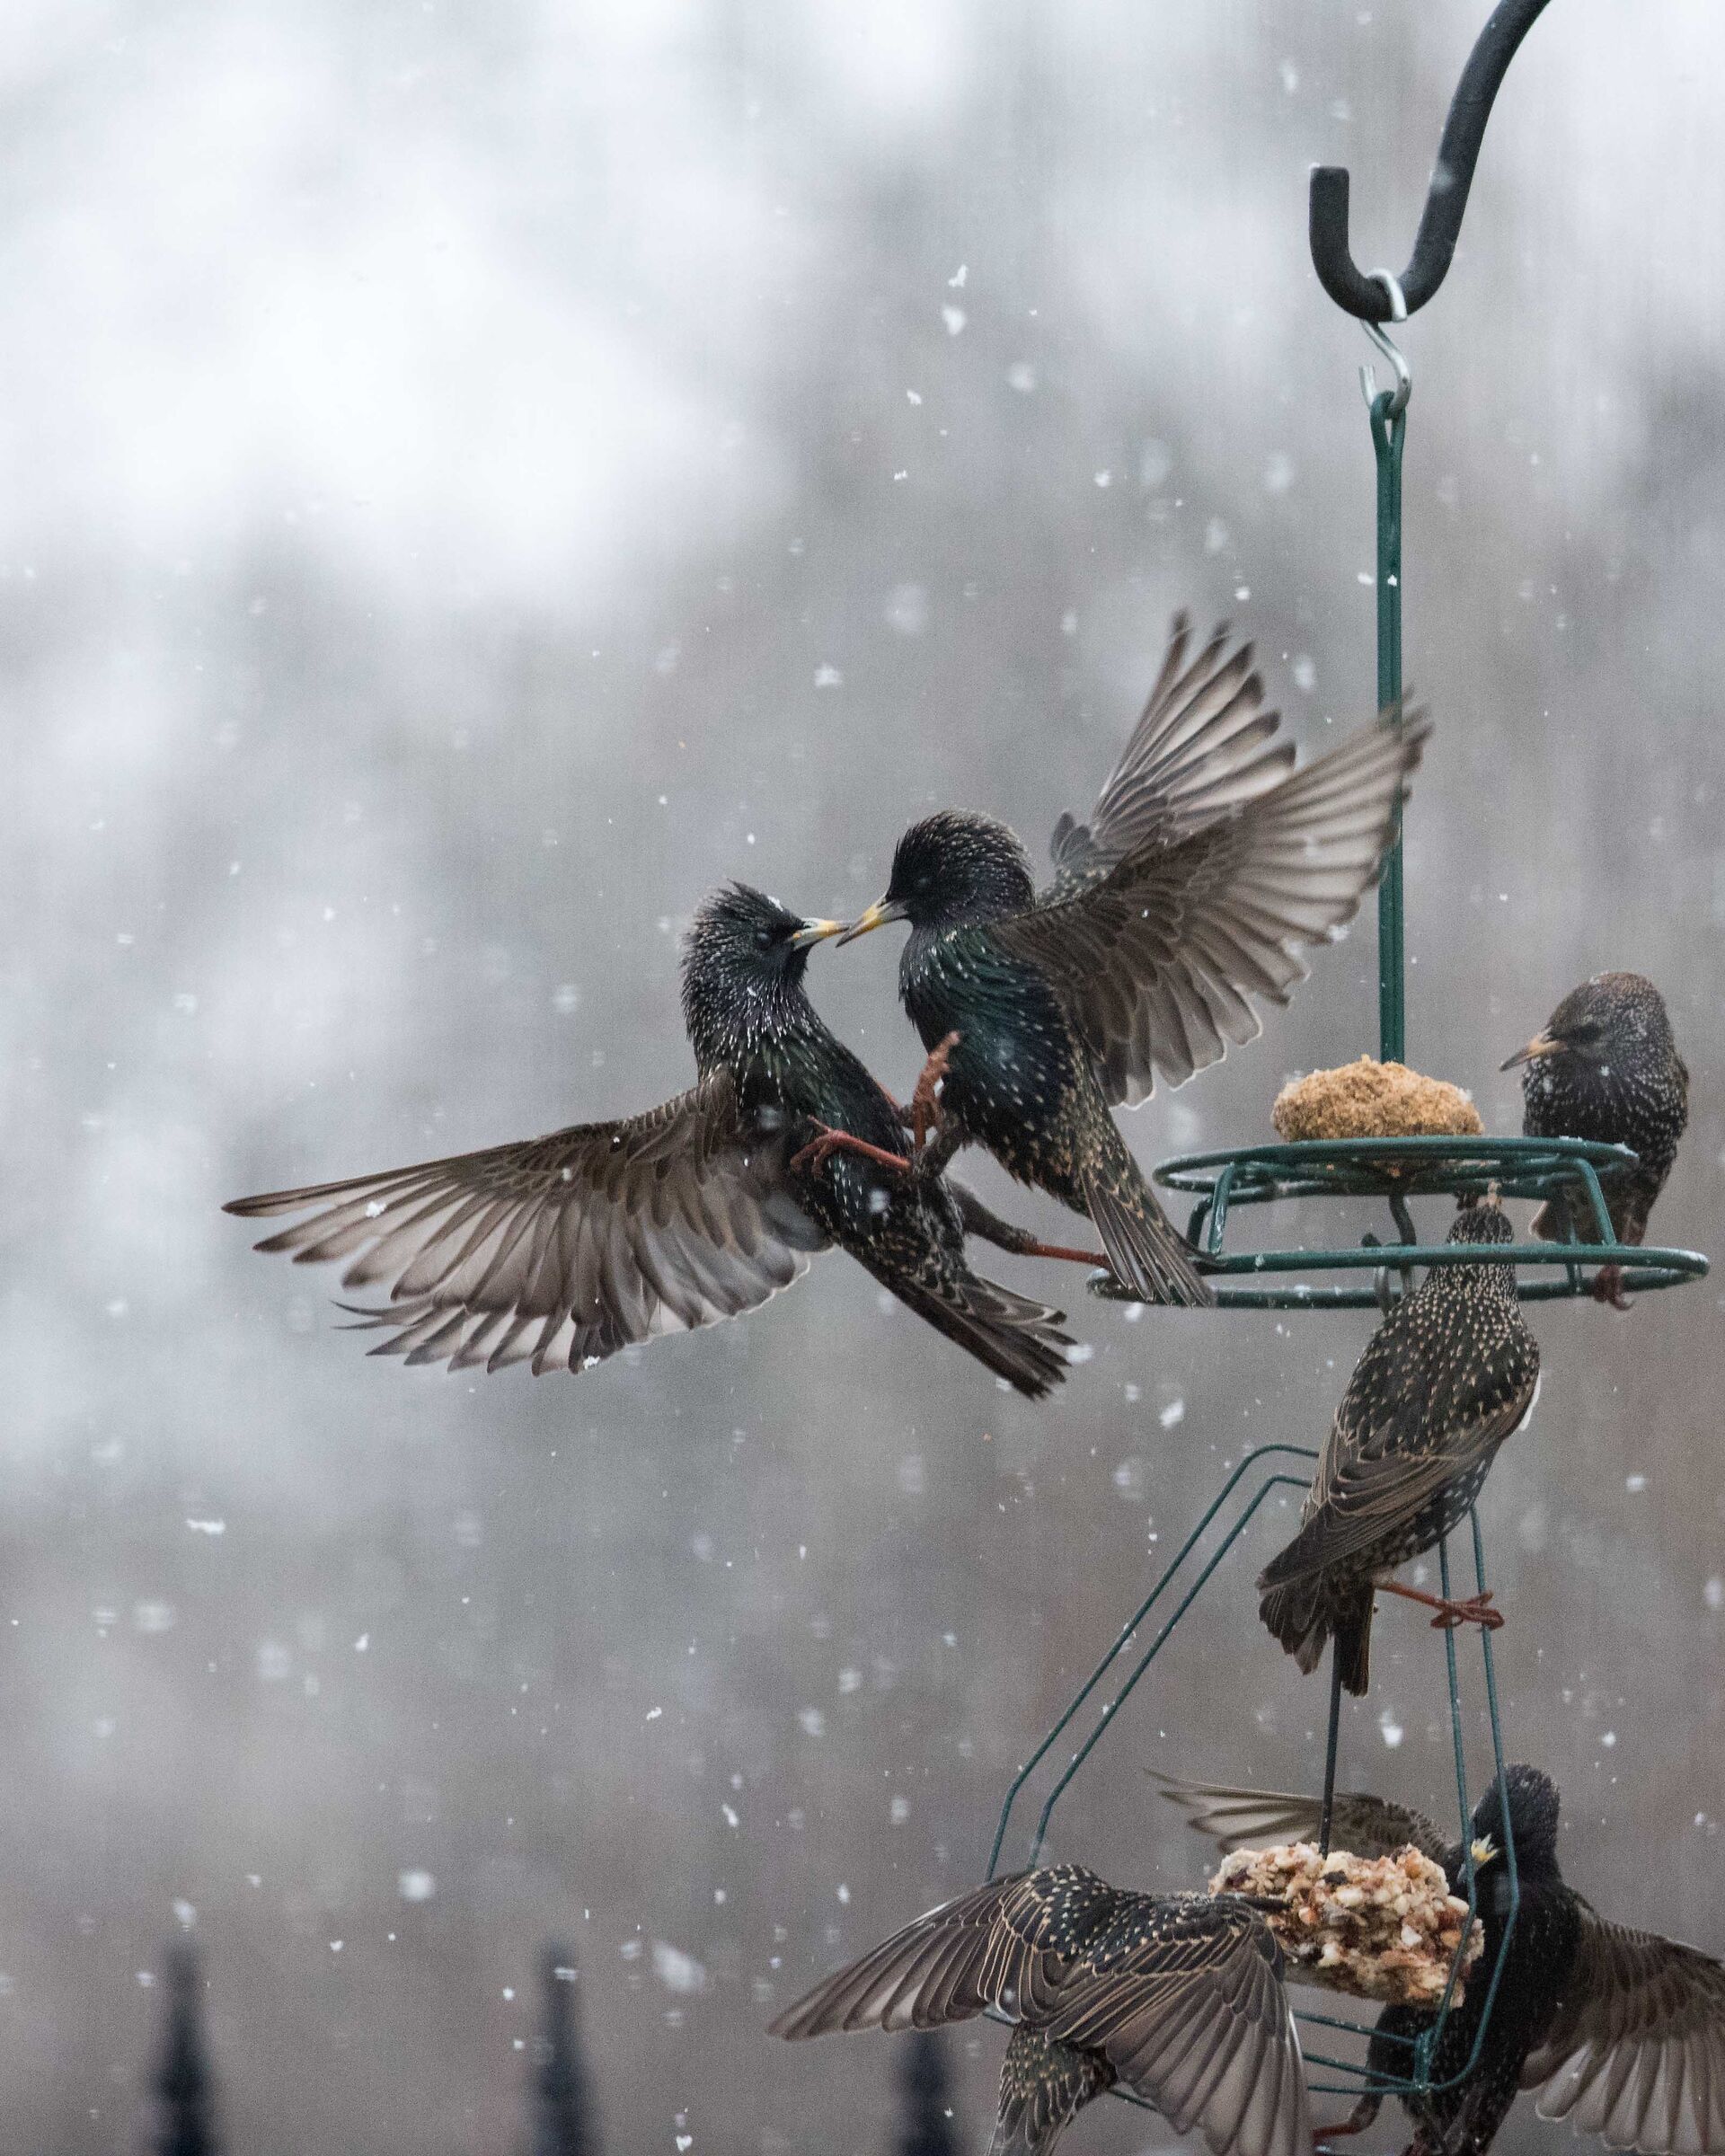 Starlings first snow flurries of 2021...